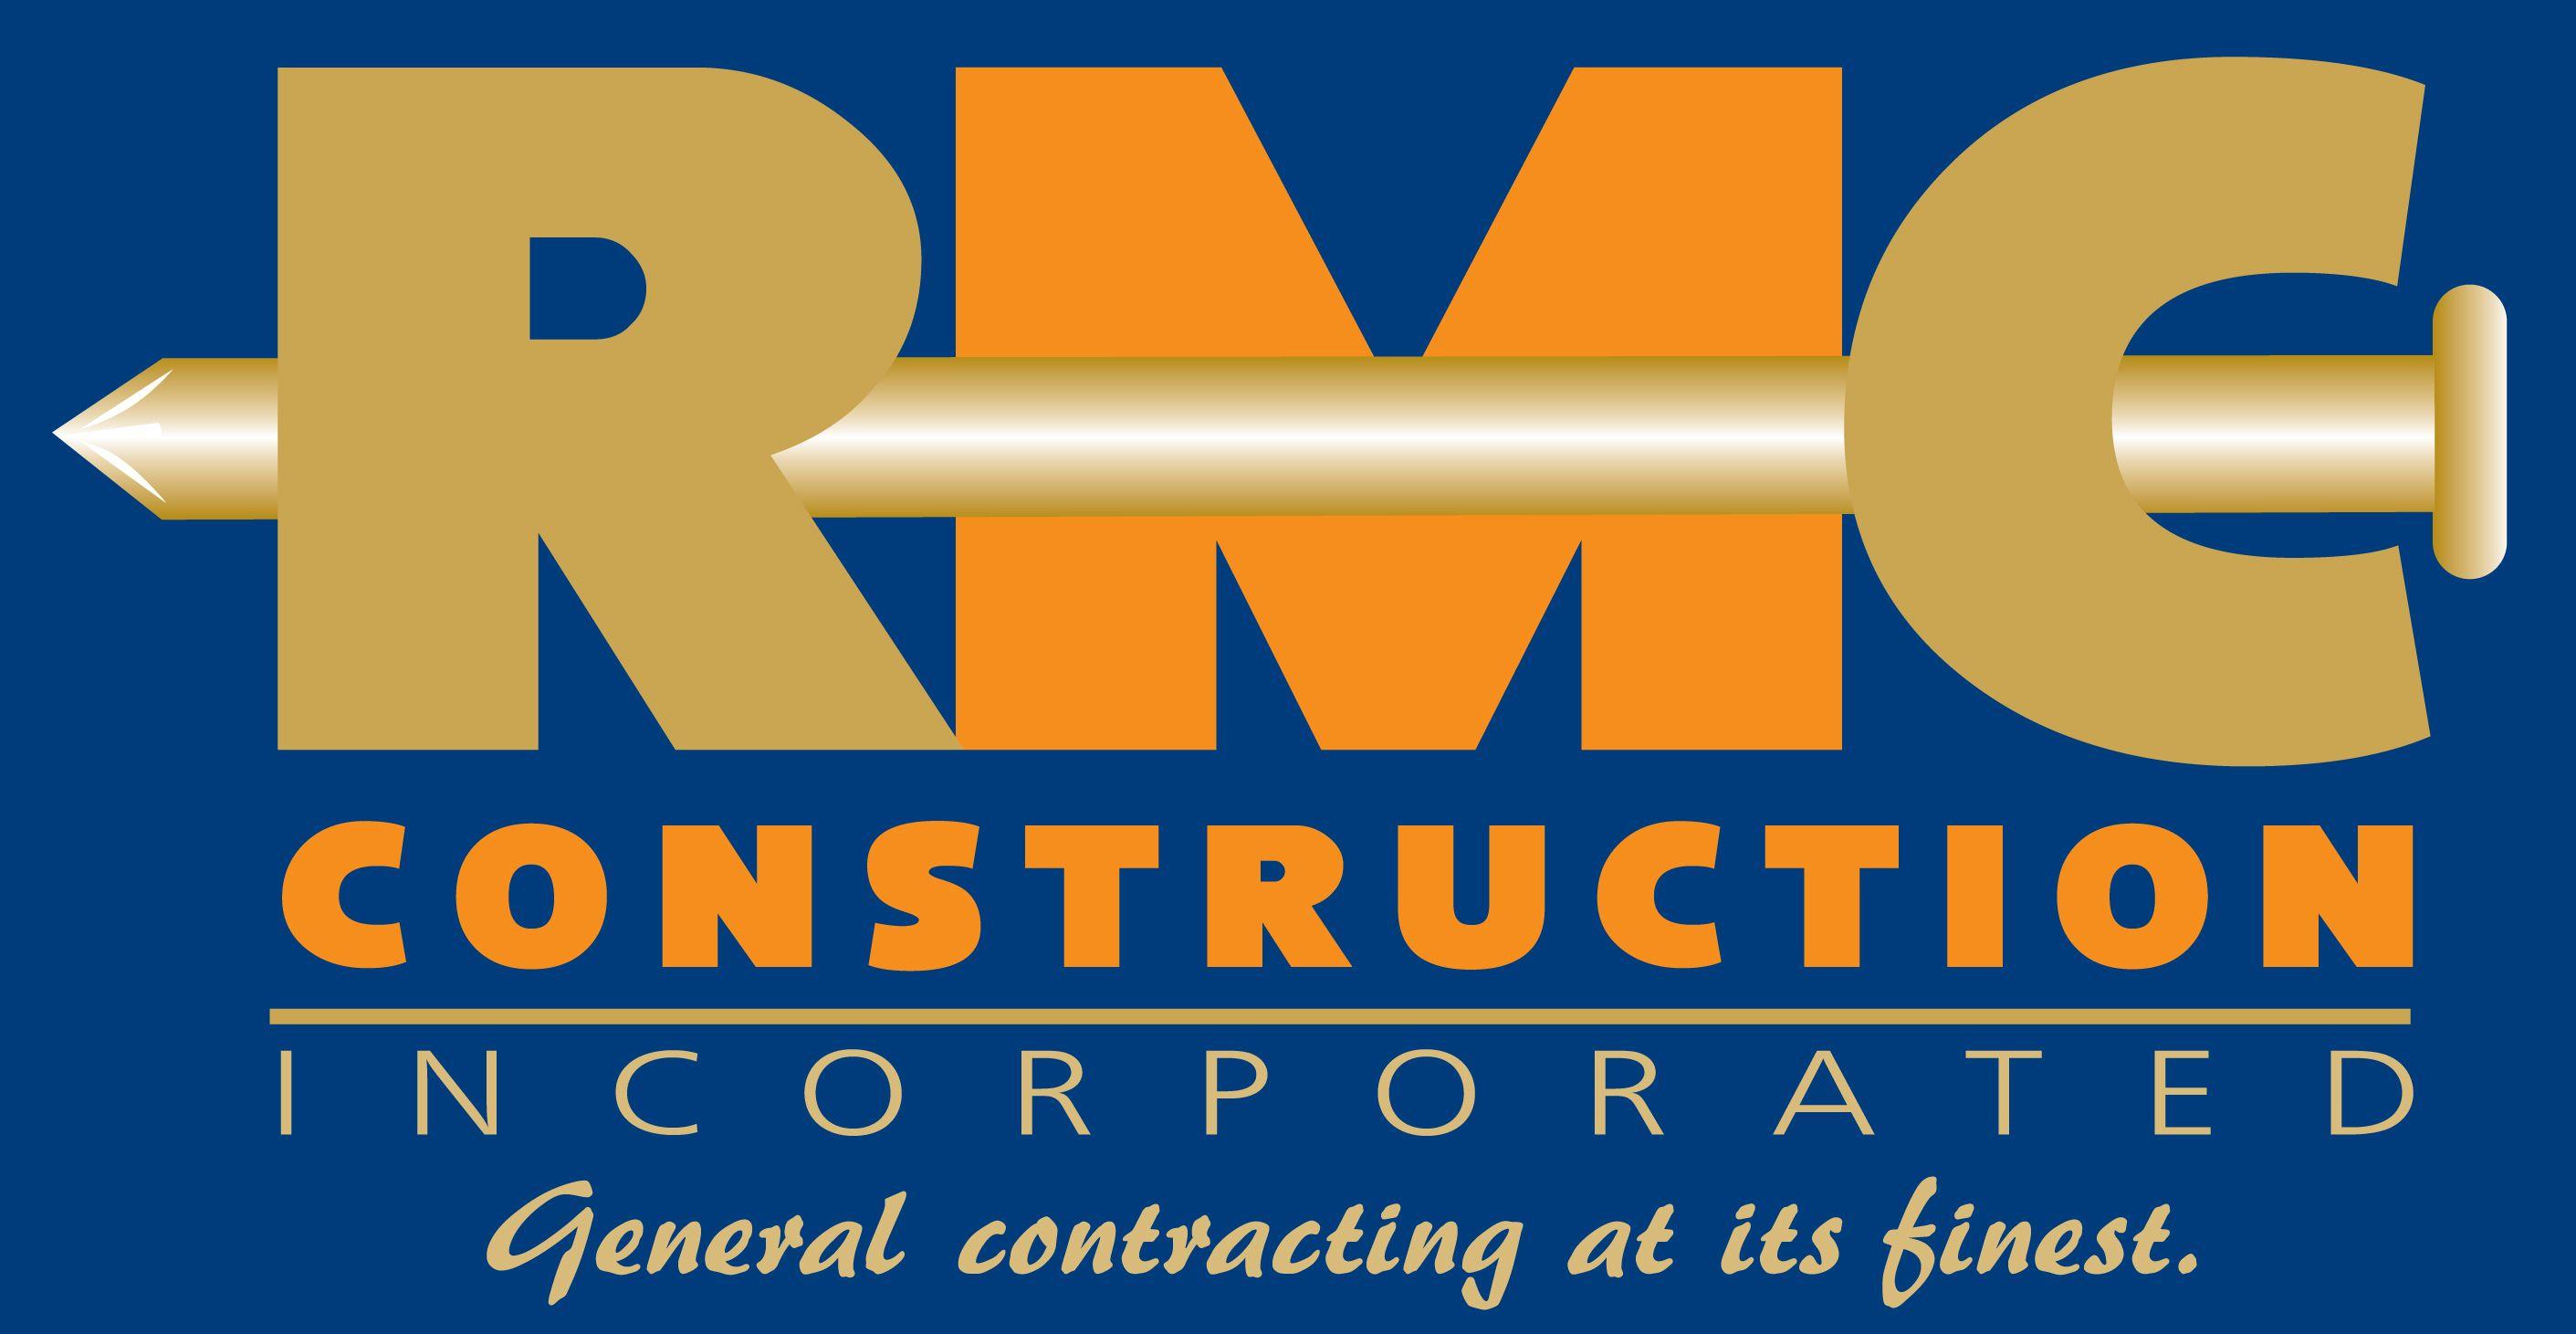 Meeting Procurement Specialists | RMC Meetings & Events